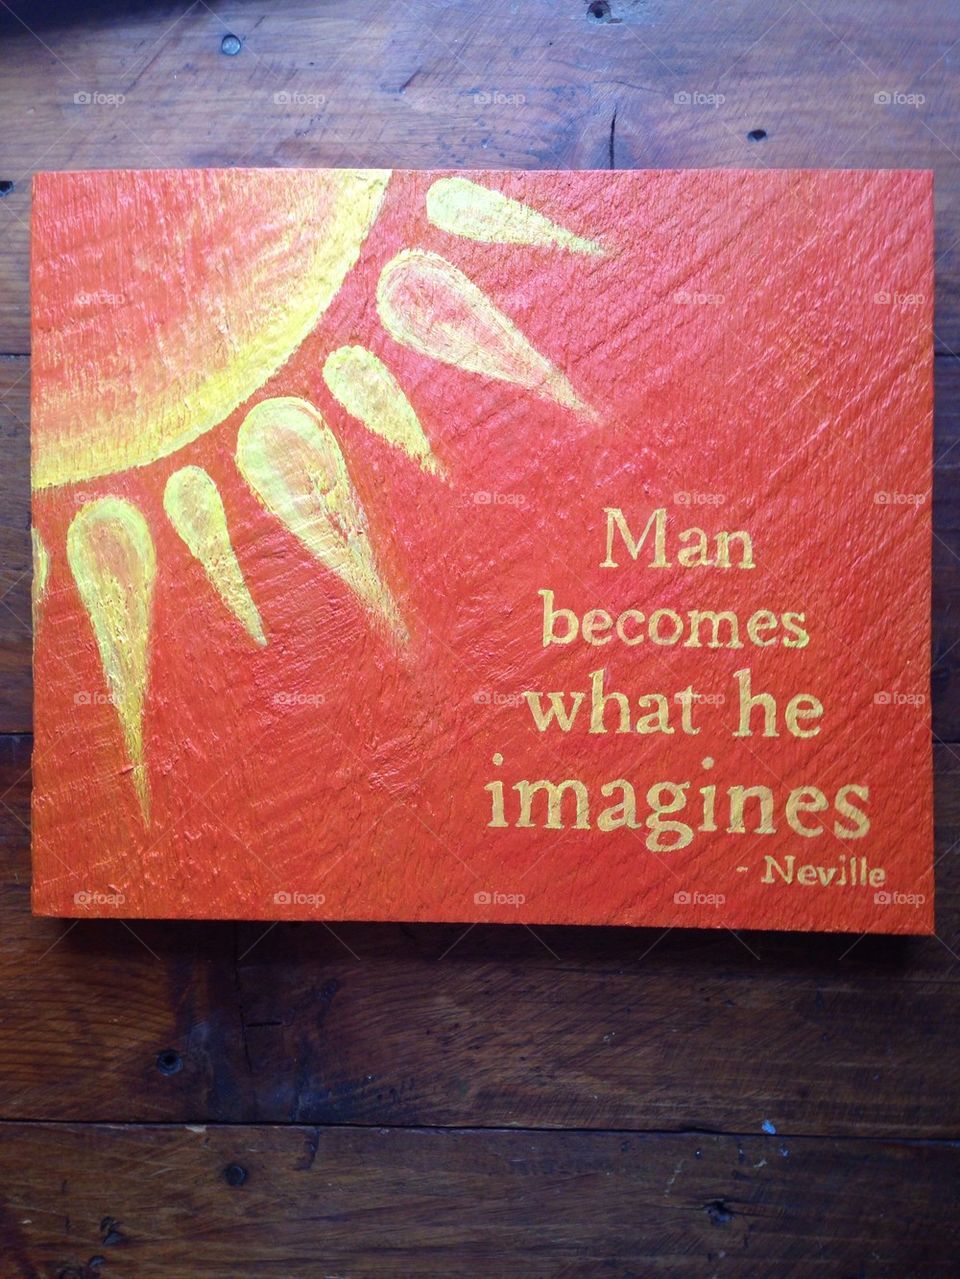 Neville quote on wood